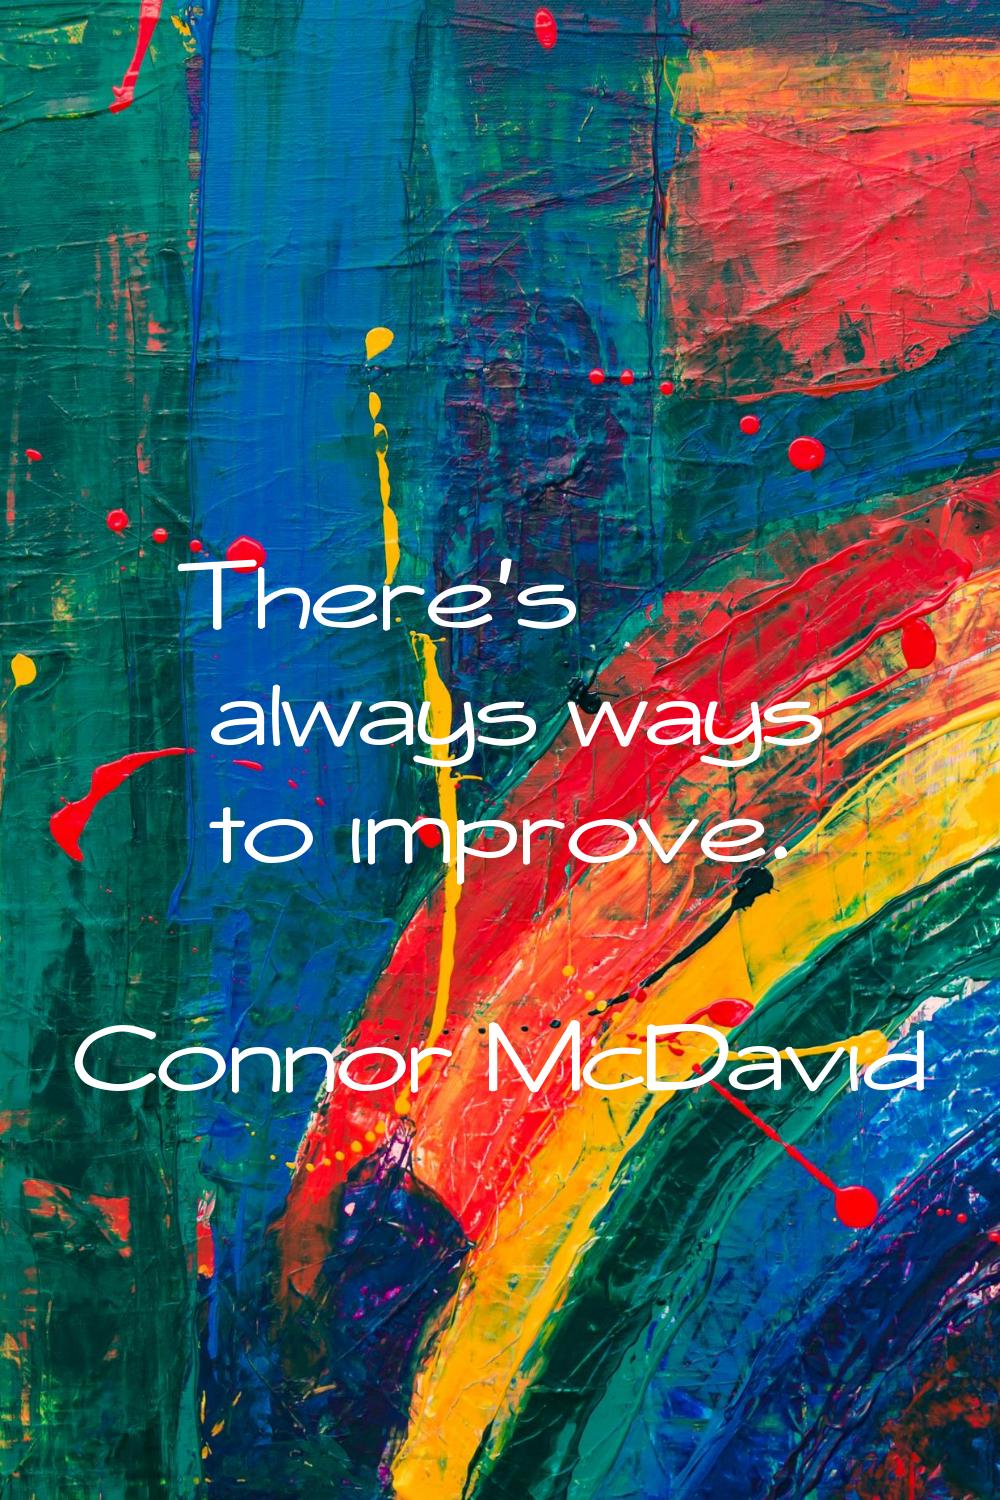 There's always ways to improve.